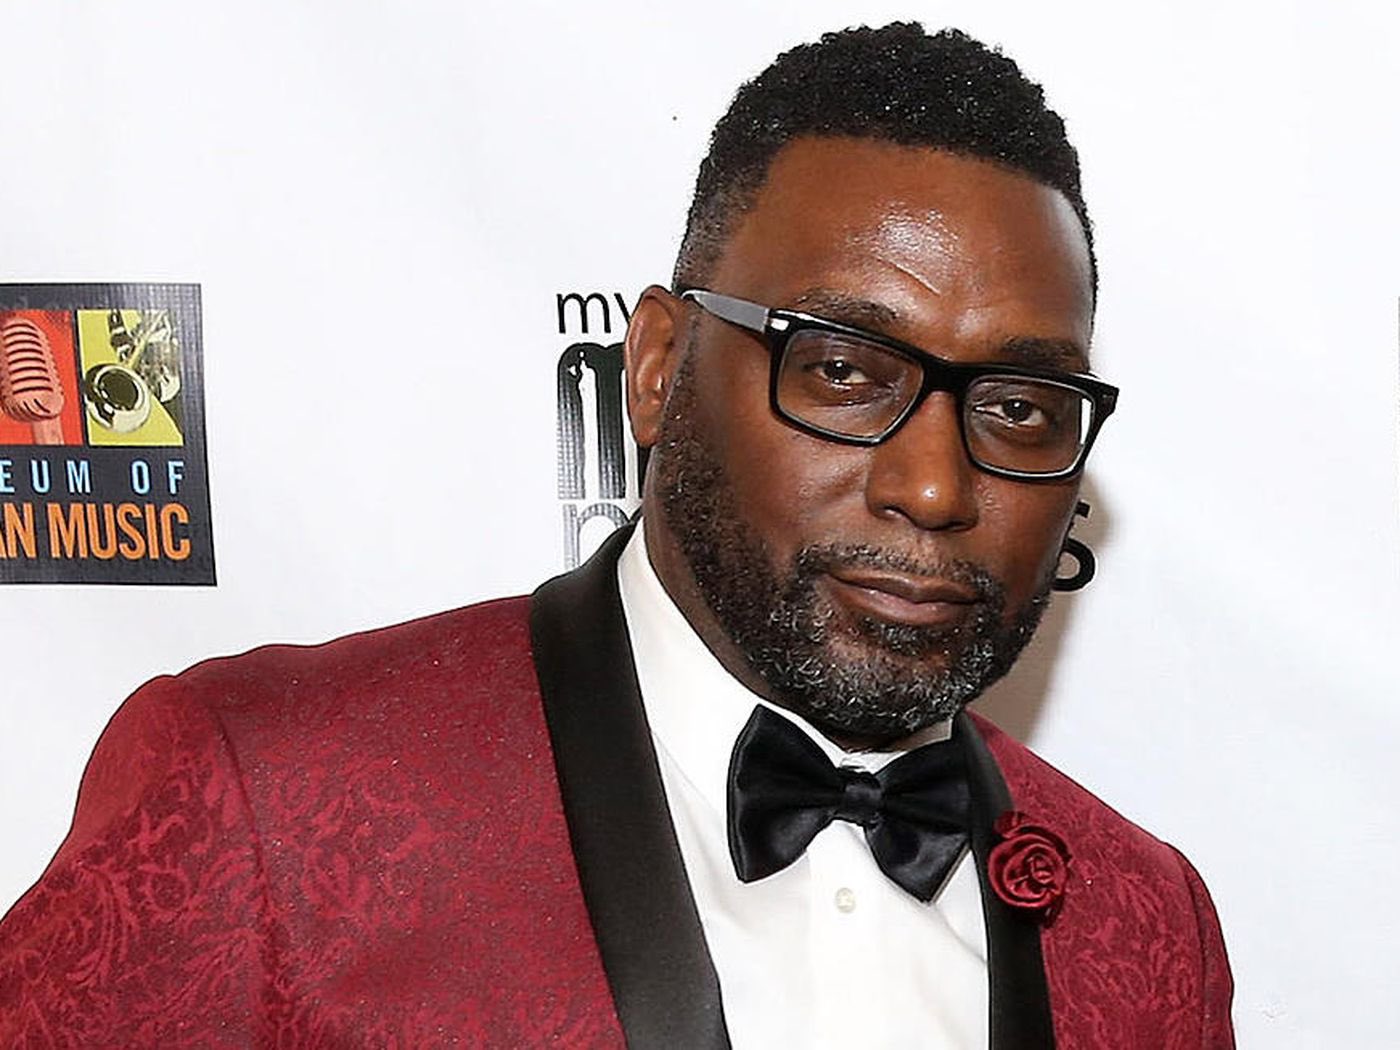 Happy Belated Birthday to the one and only Big Daddy Kane! 